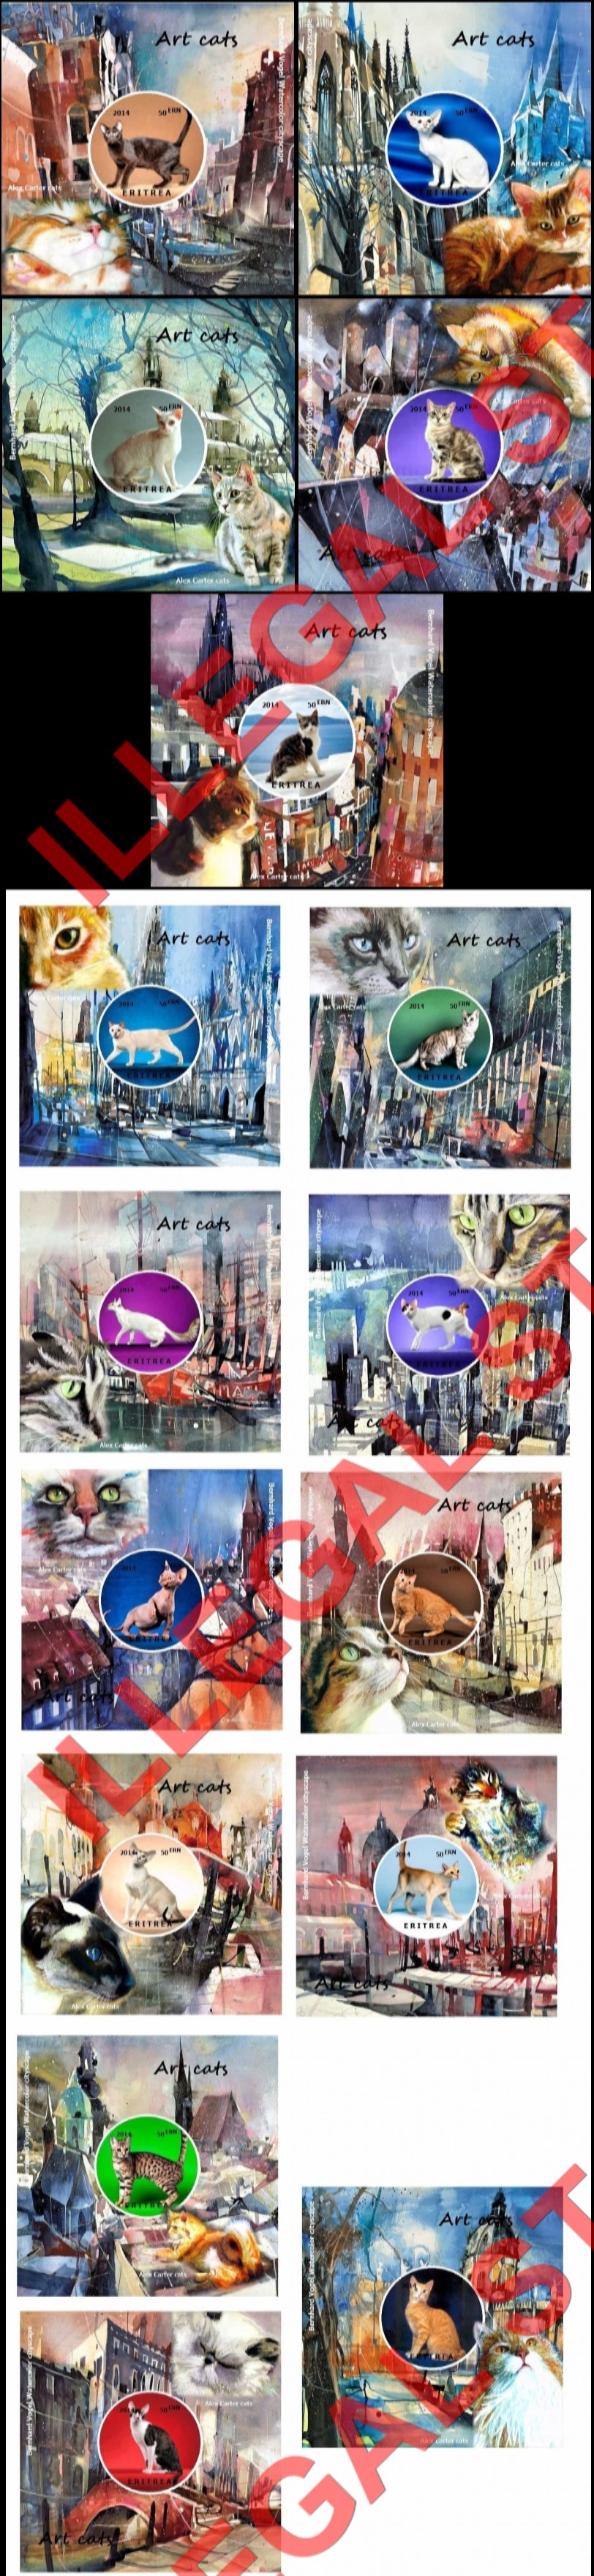 Eritrea 2014 Cats Paintings Counterfeit Illegal Stamp Souvenir Sheets of 1